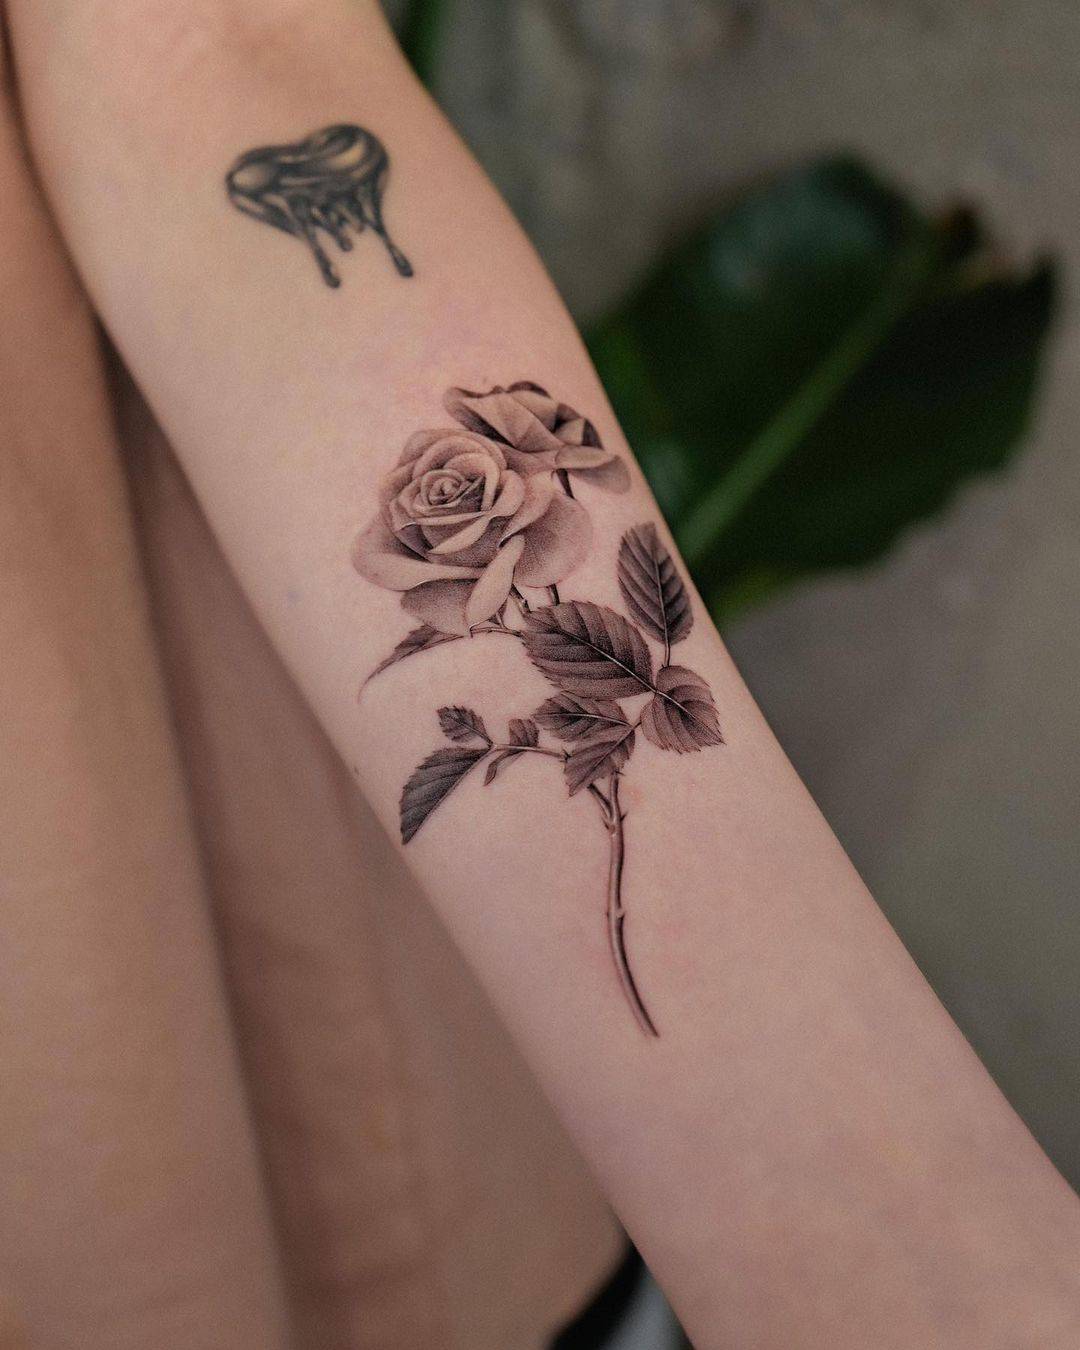 Amazing rose tattoo by frommay tat